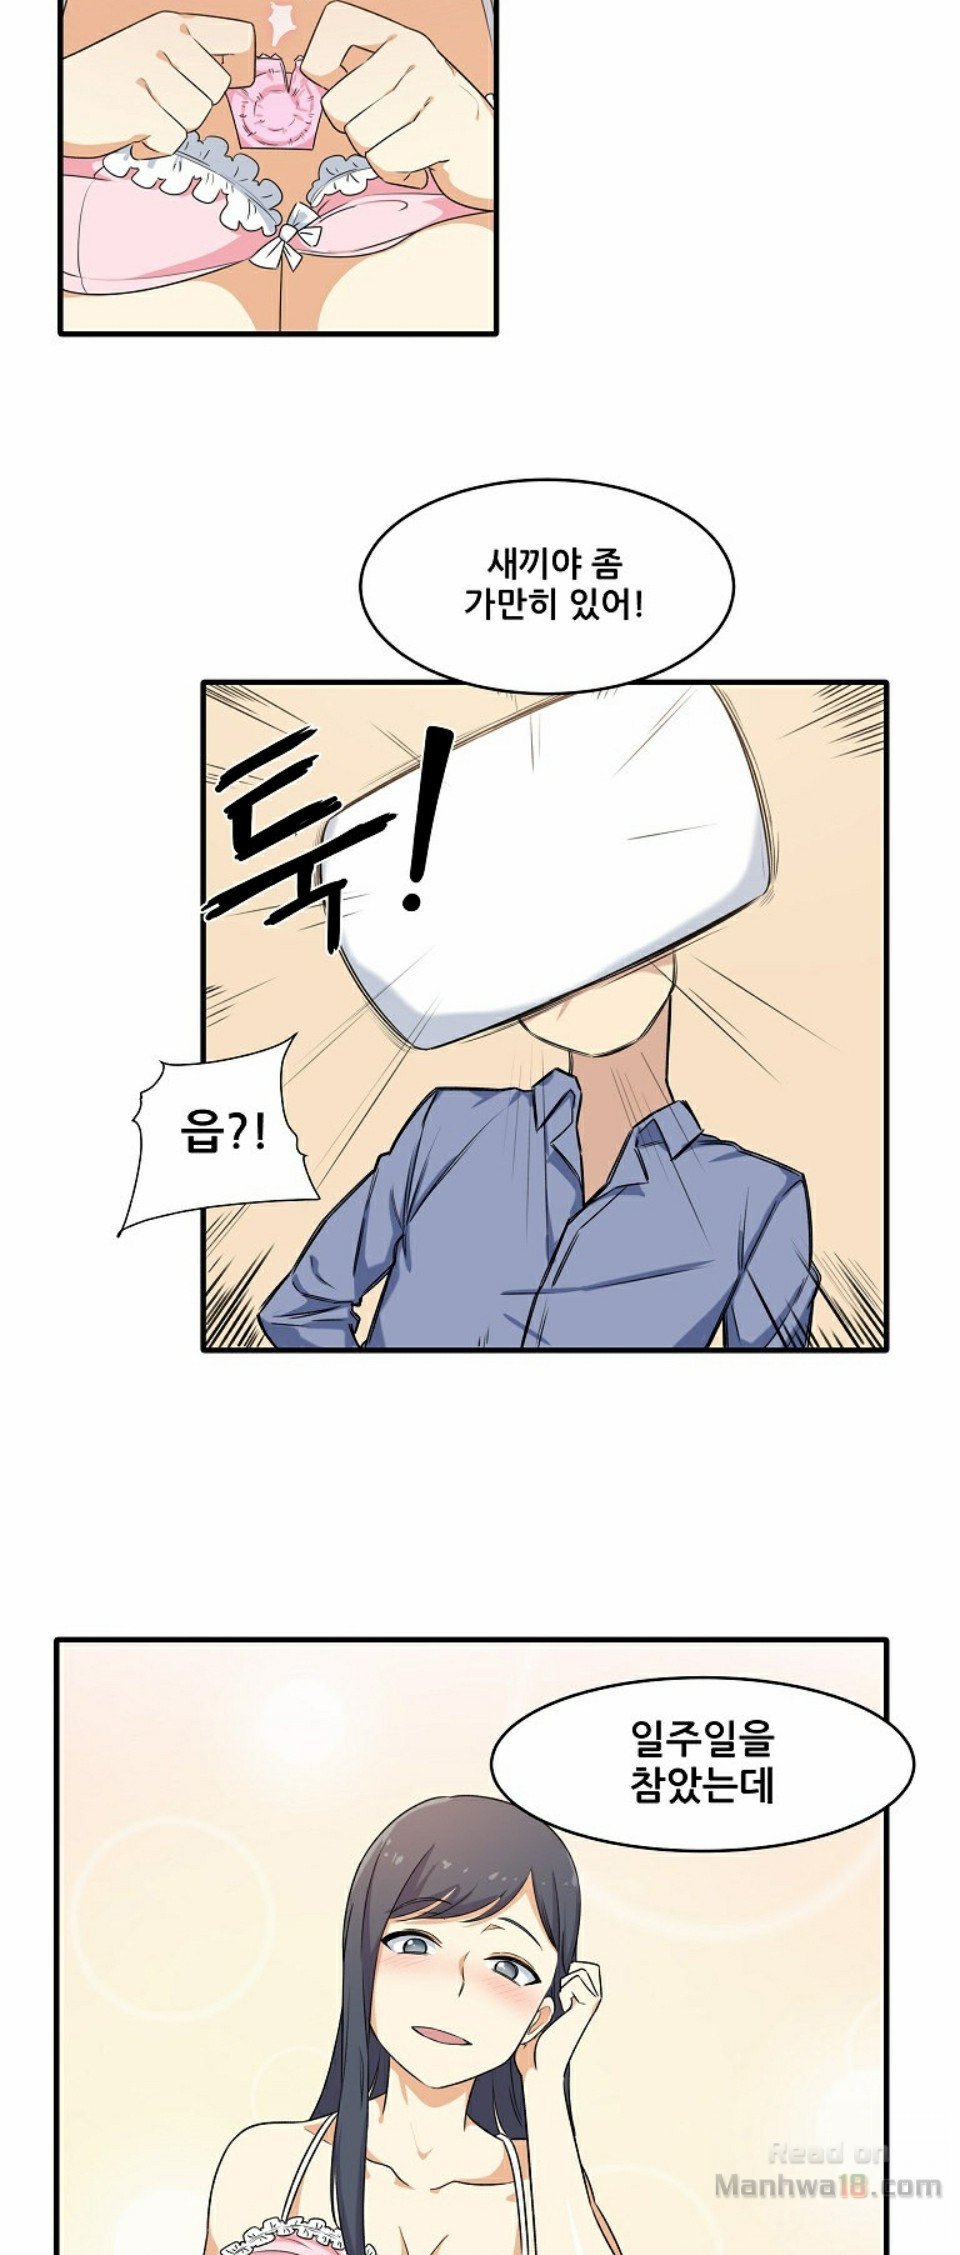 the-ark-is-me-raw-chap-3-19